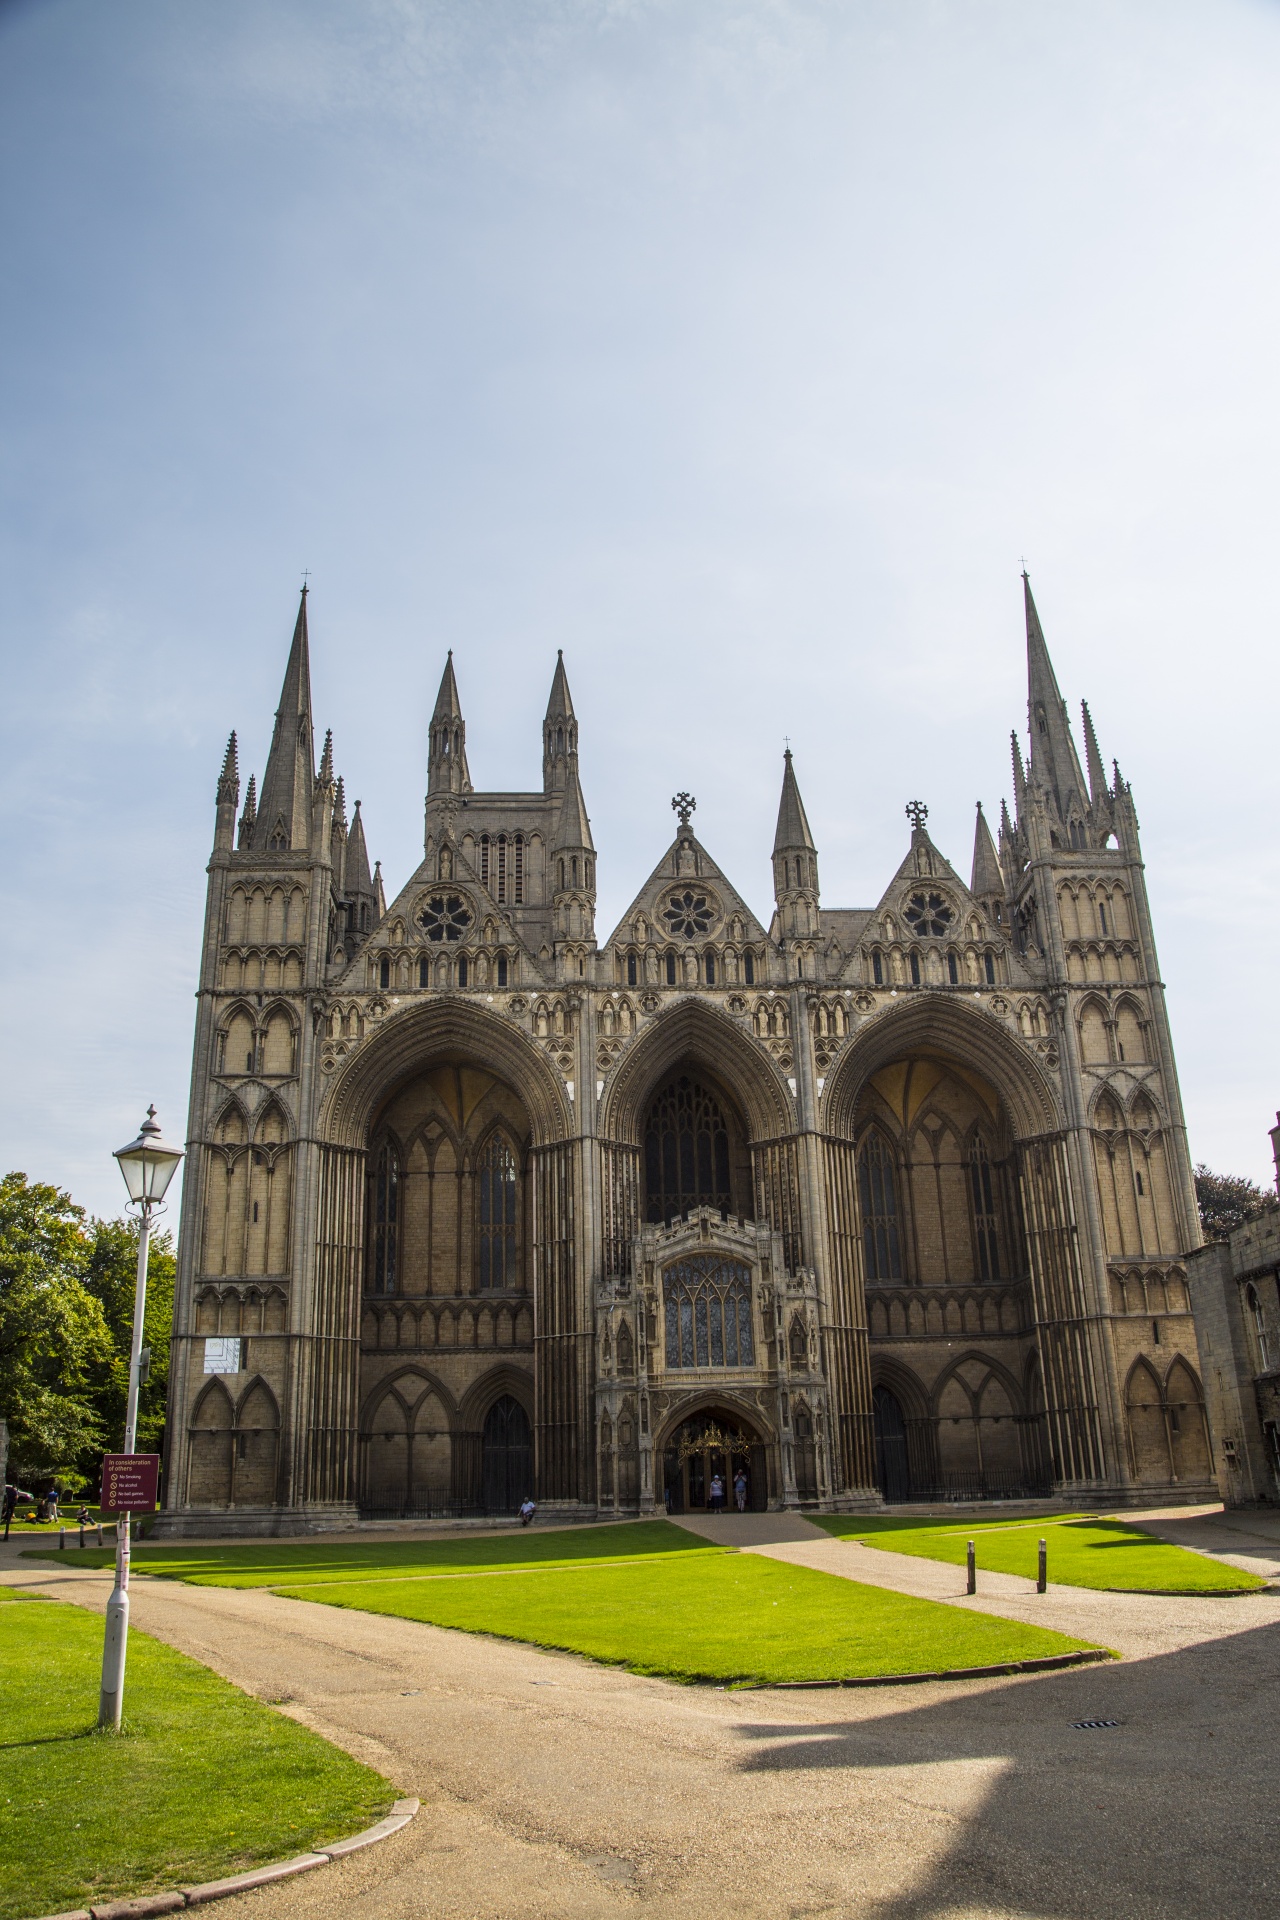 Peterborough Cathedral, properly the Cathedral Church of St Peter, St Paul and St Andrew – also known as Saint Peter's Cathedral in the United Kingdom – is the seat of the Anglican Bishop of Peterborough